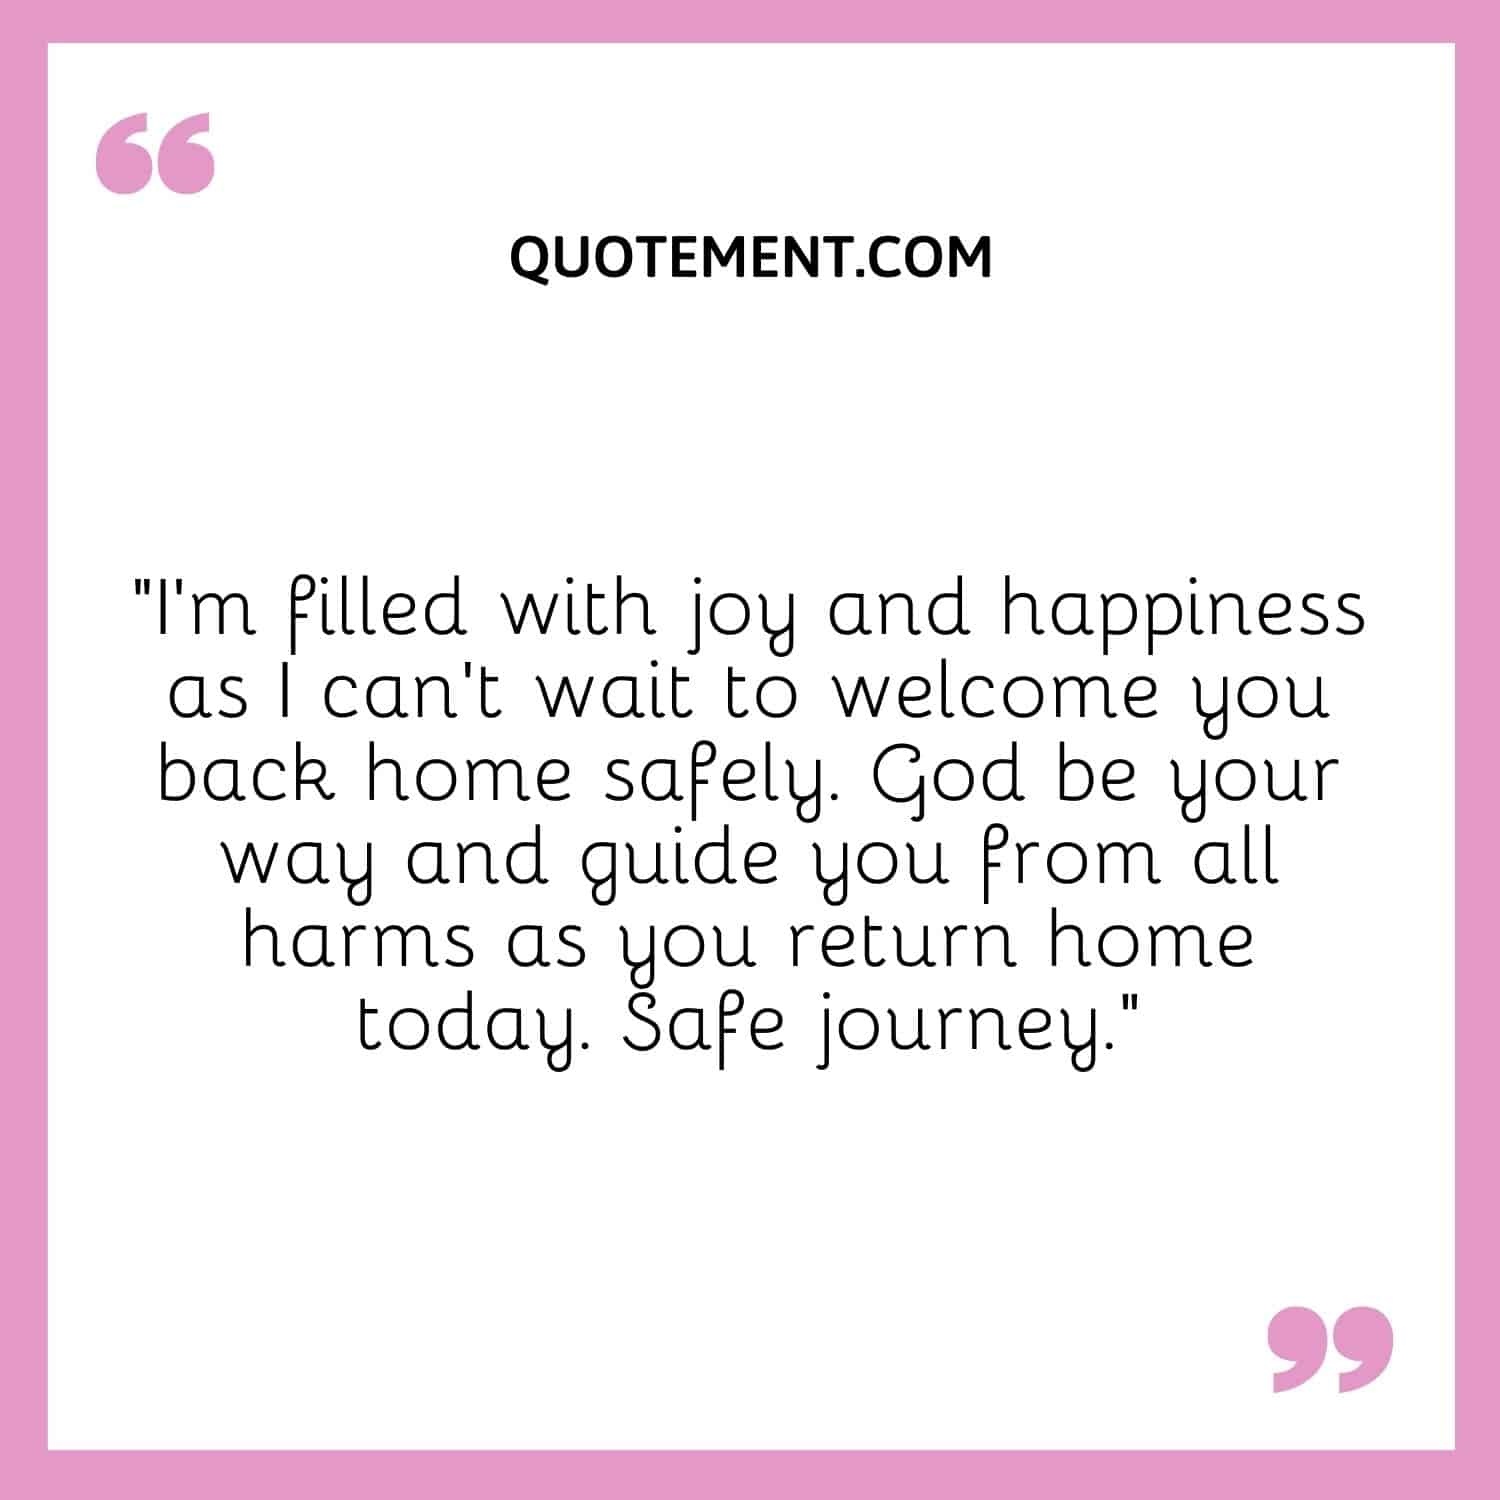 “I'm filled with joy and happiness as I can't wait to welcome you back home safely.